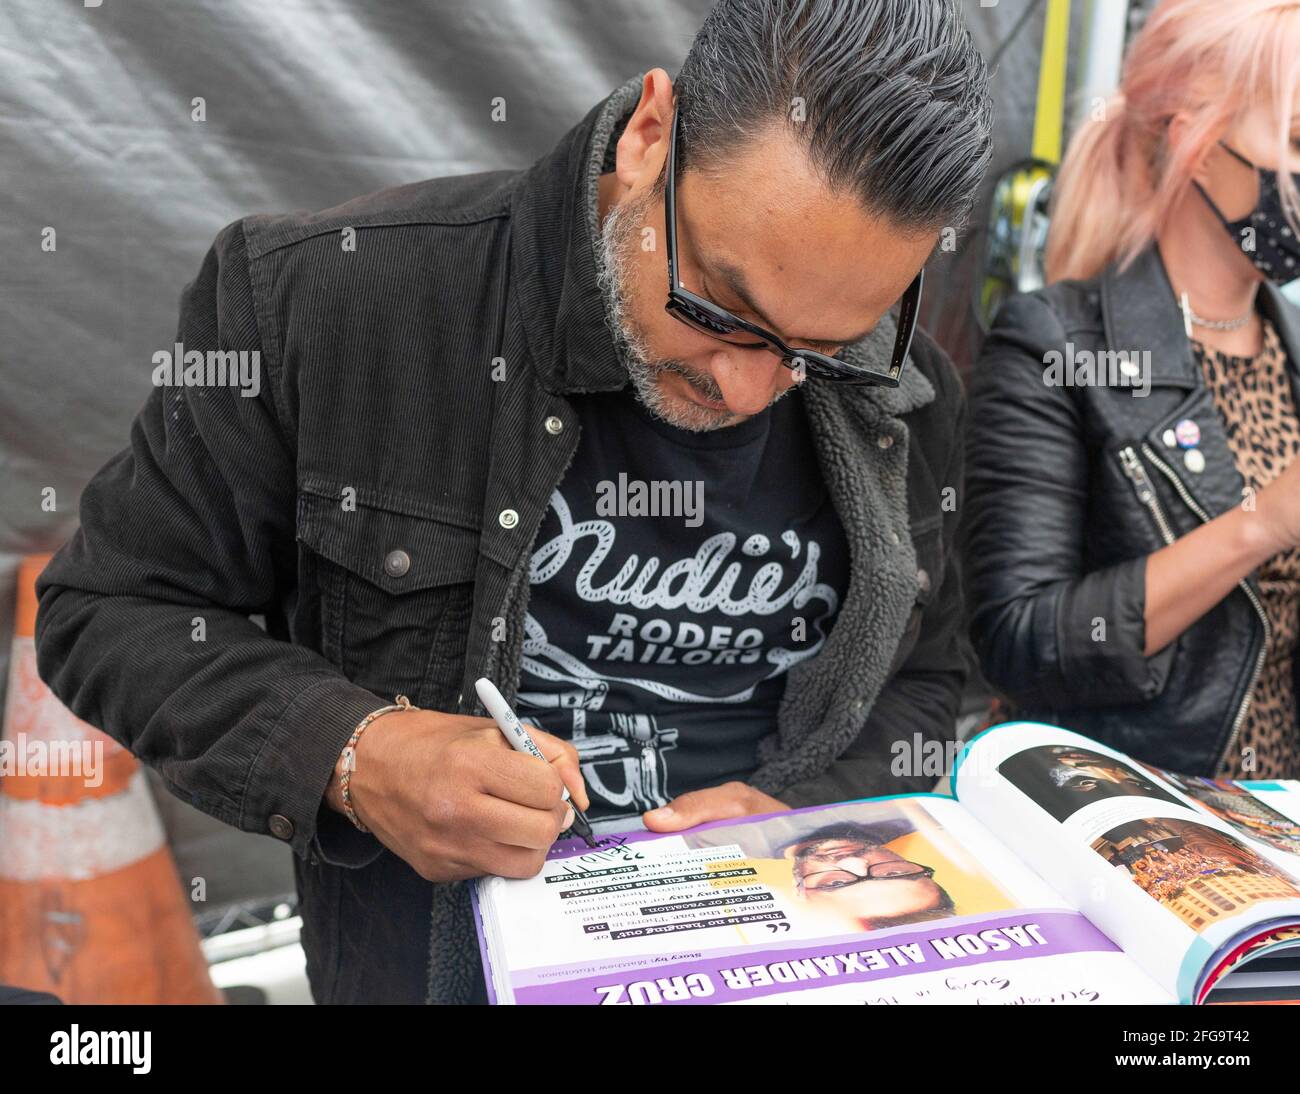 april 24 2021 long beach california usa jason cruz at the punk rock and paintbrushes official book signing and art show at alexs bar patio in long beach california credit image charlie steffenszuma wire 2FG9T42